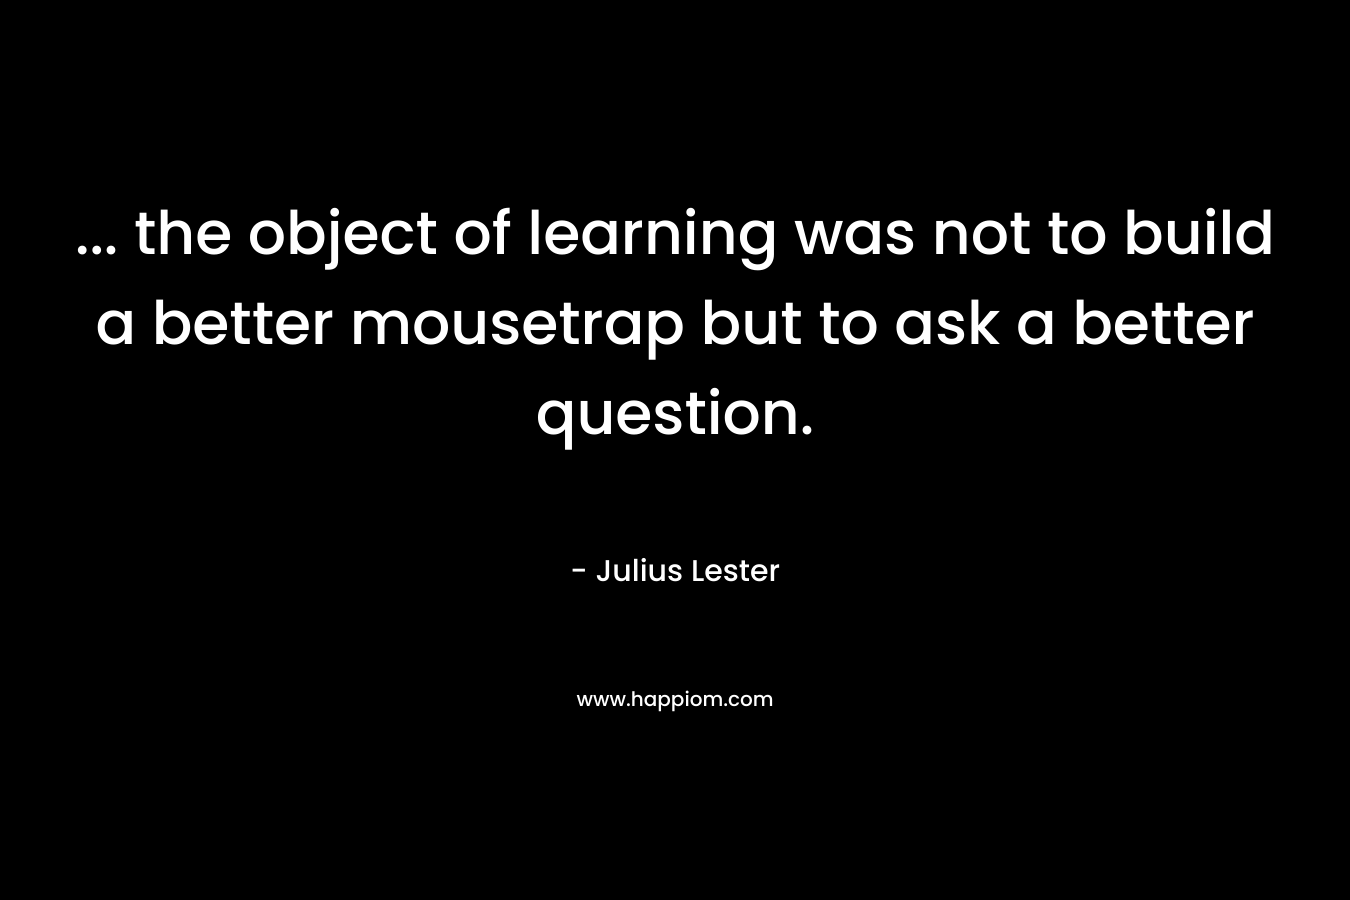 ... the object of learning was not to build a better mousetrap but to ask a better question.